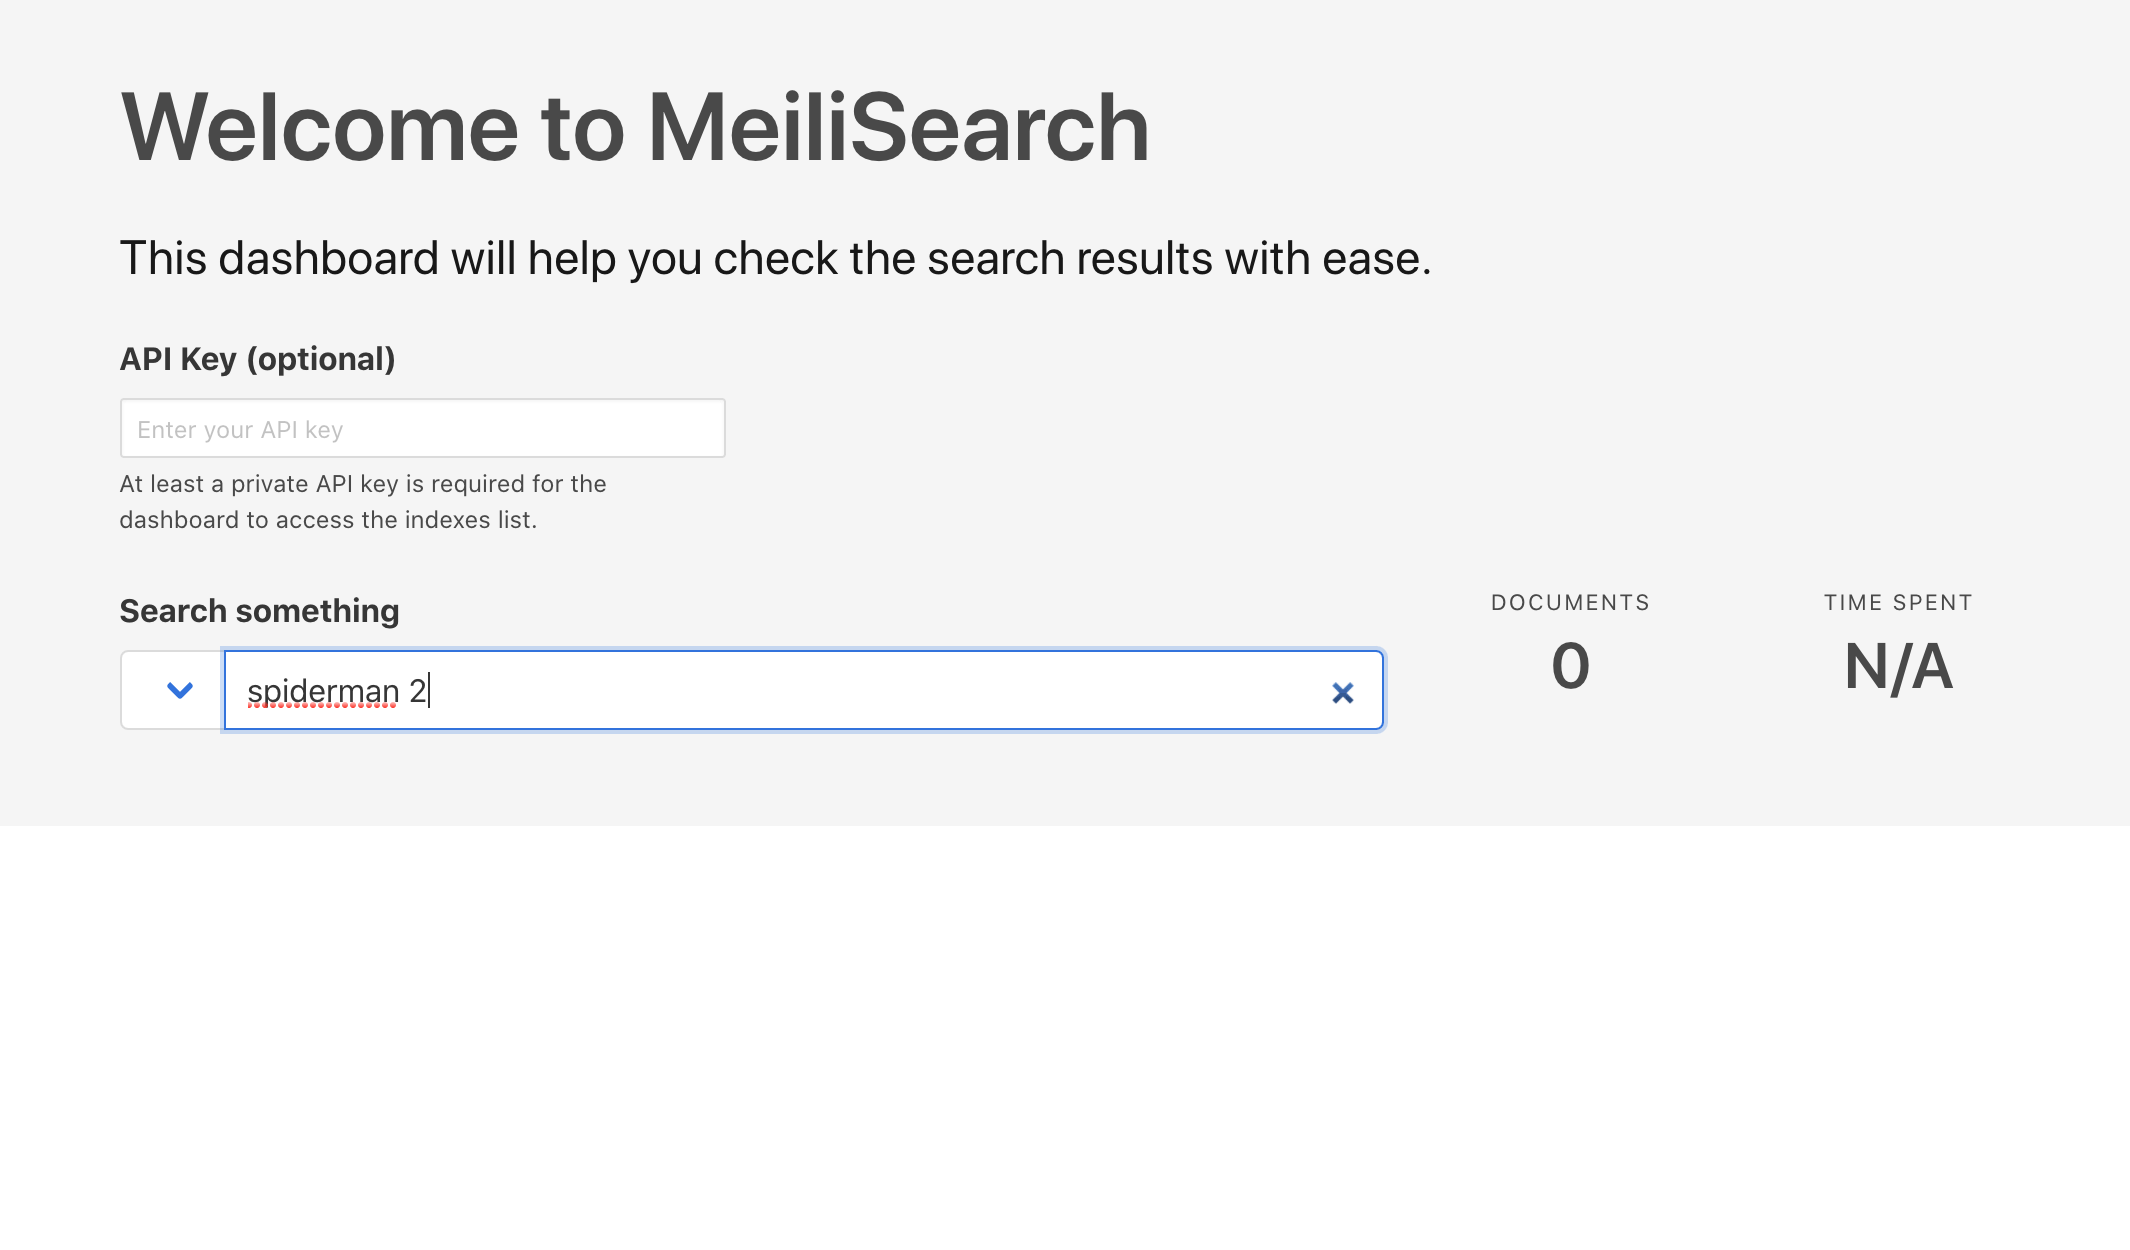 MeiliSearch for the search index has not been loaded yet